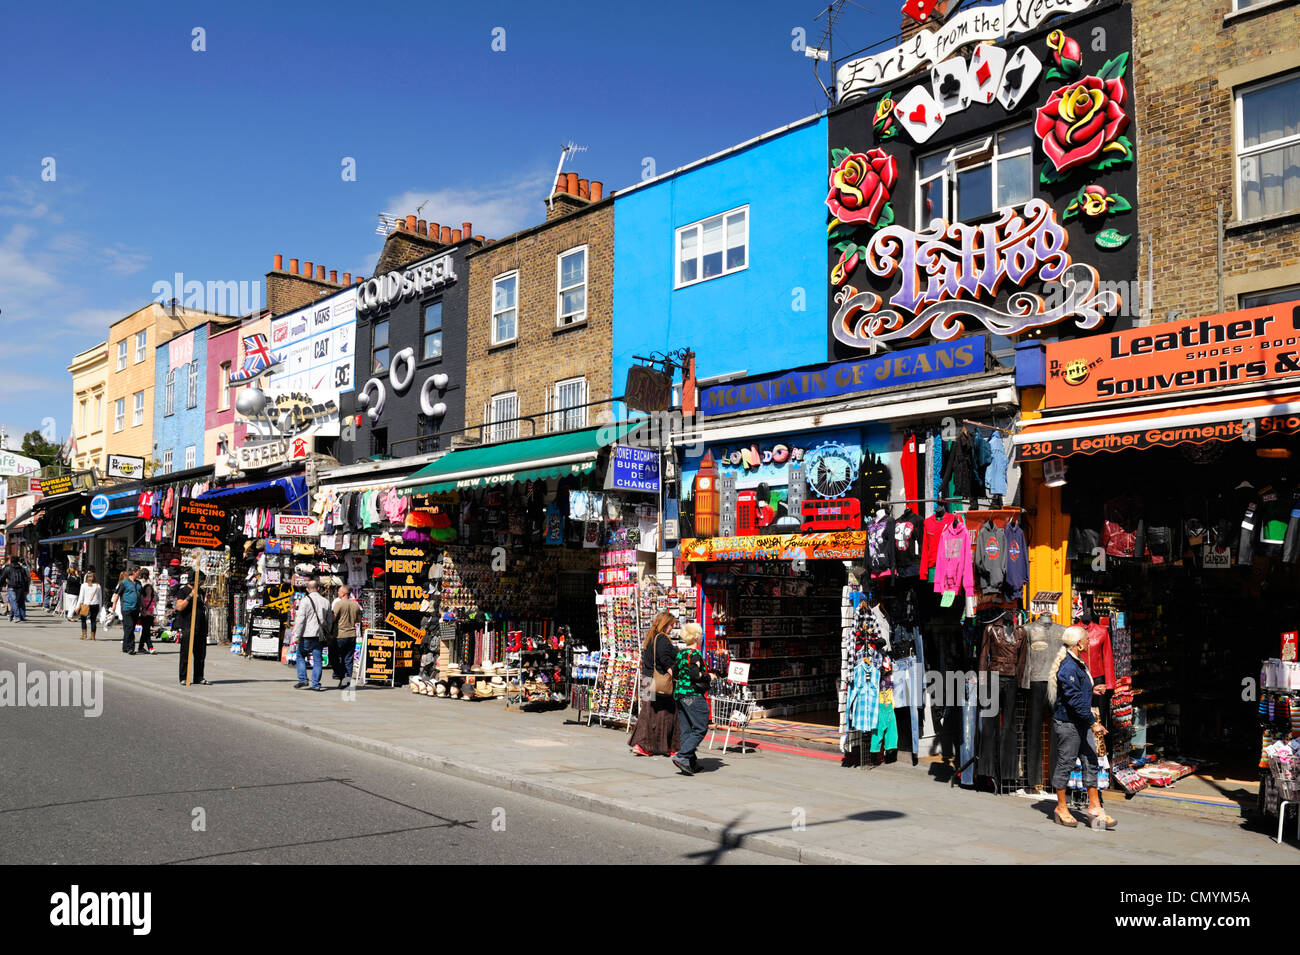 United Kingdom, London, Camden, walkers at the trendy stores of Camden Market Stock Photo